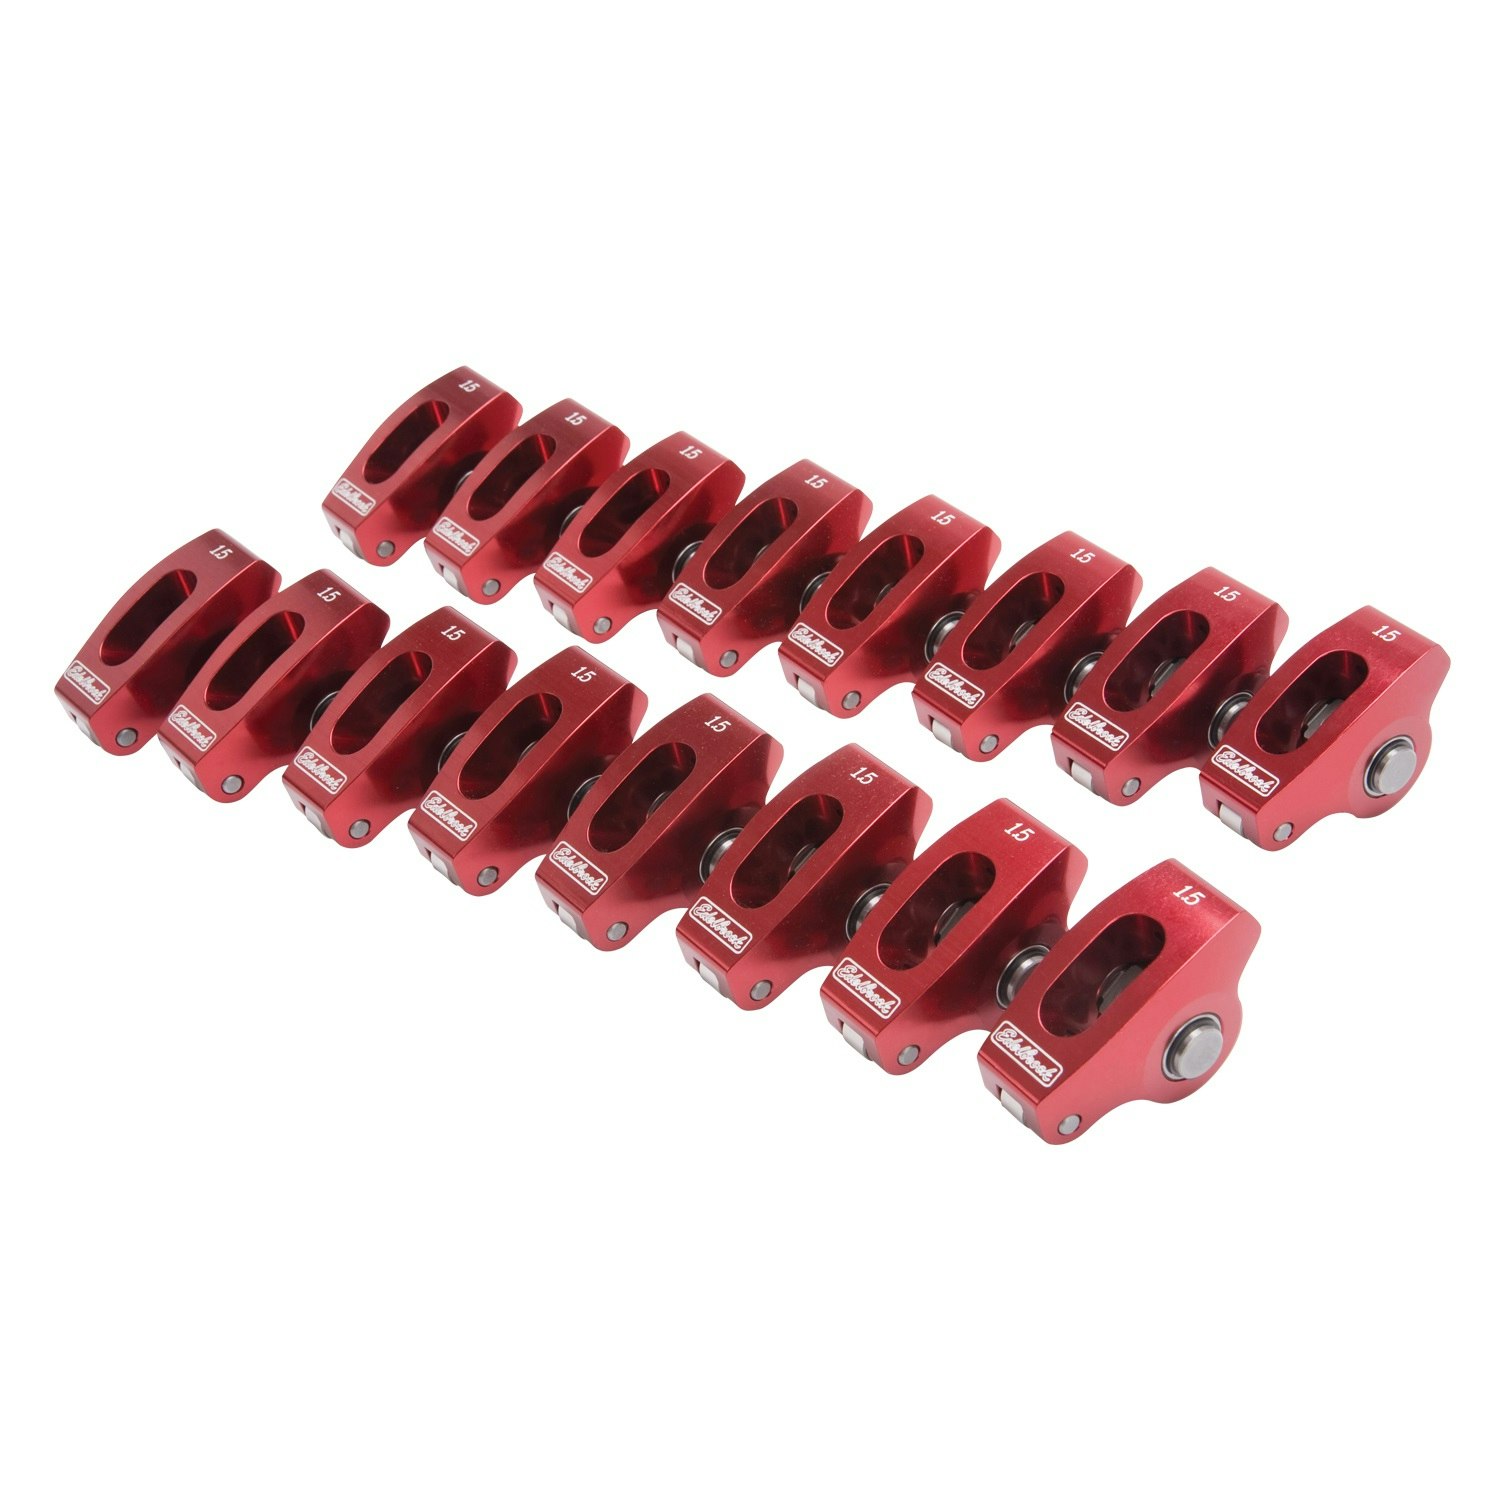 Poly Locks For Roller Rocker Arms 7/16" Poly Locks Set Of 16 Chevy Small Block 